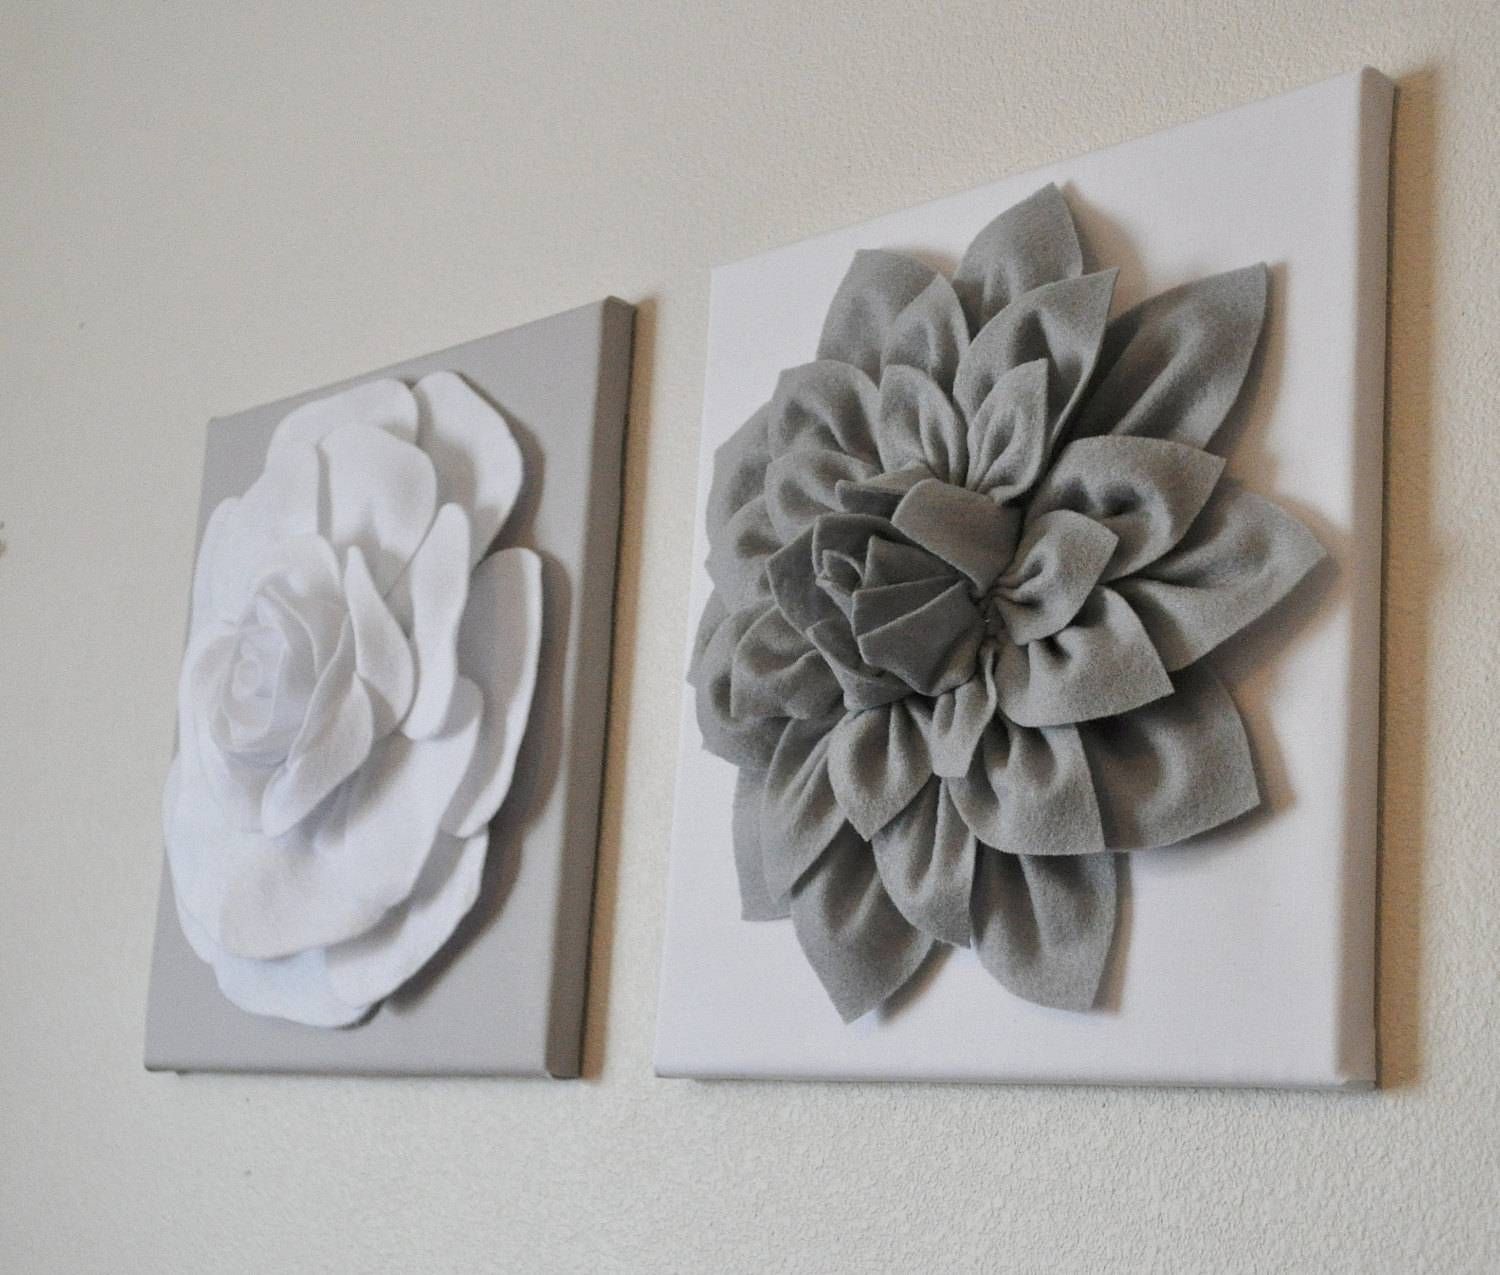 Two Wall Flowers Gray Dahlia On White And White Rose On Gray Pertaining To Most Recent Flower Wall Art Canvas (View 3 of 20)